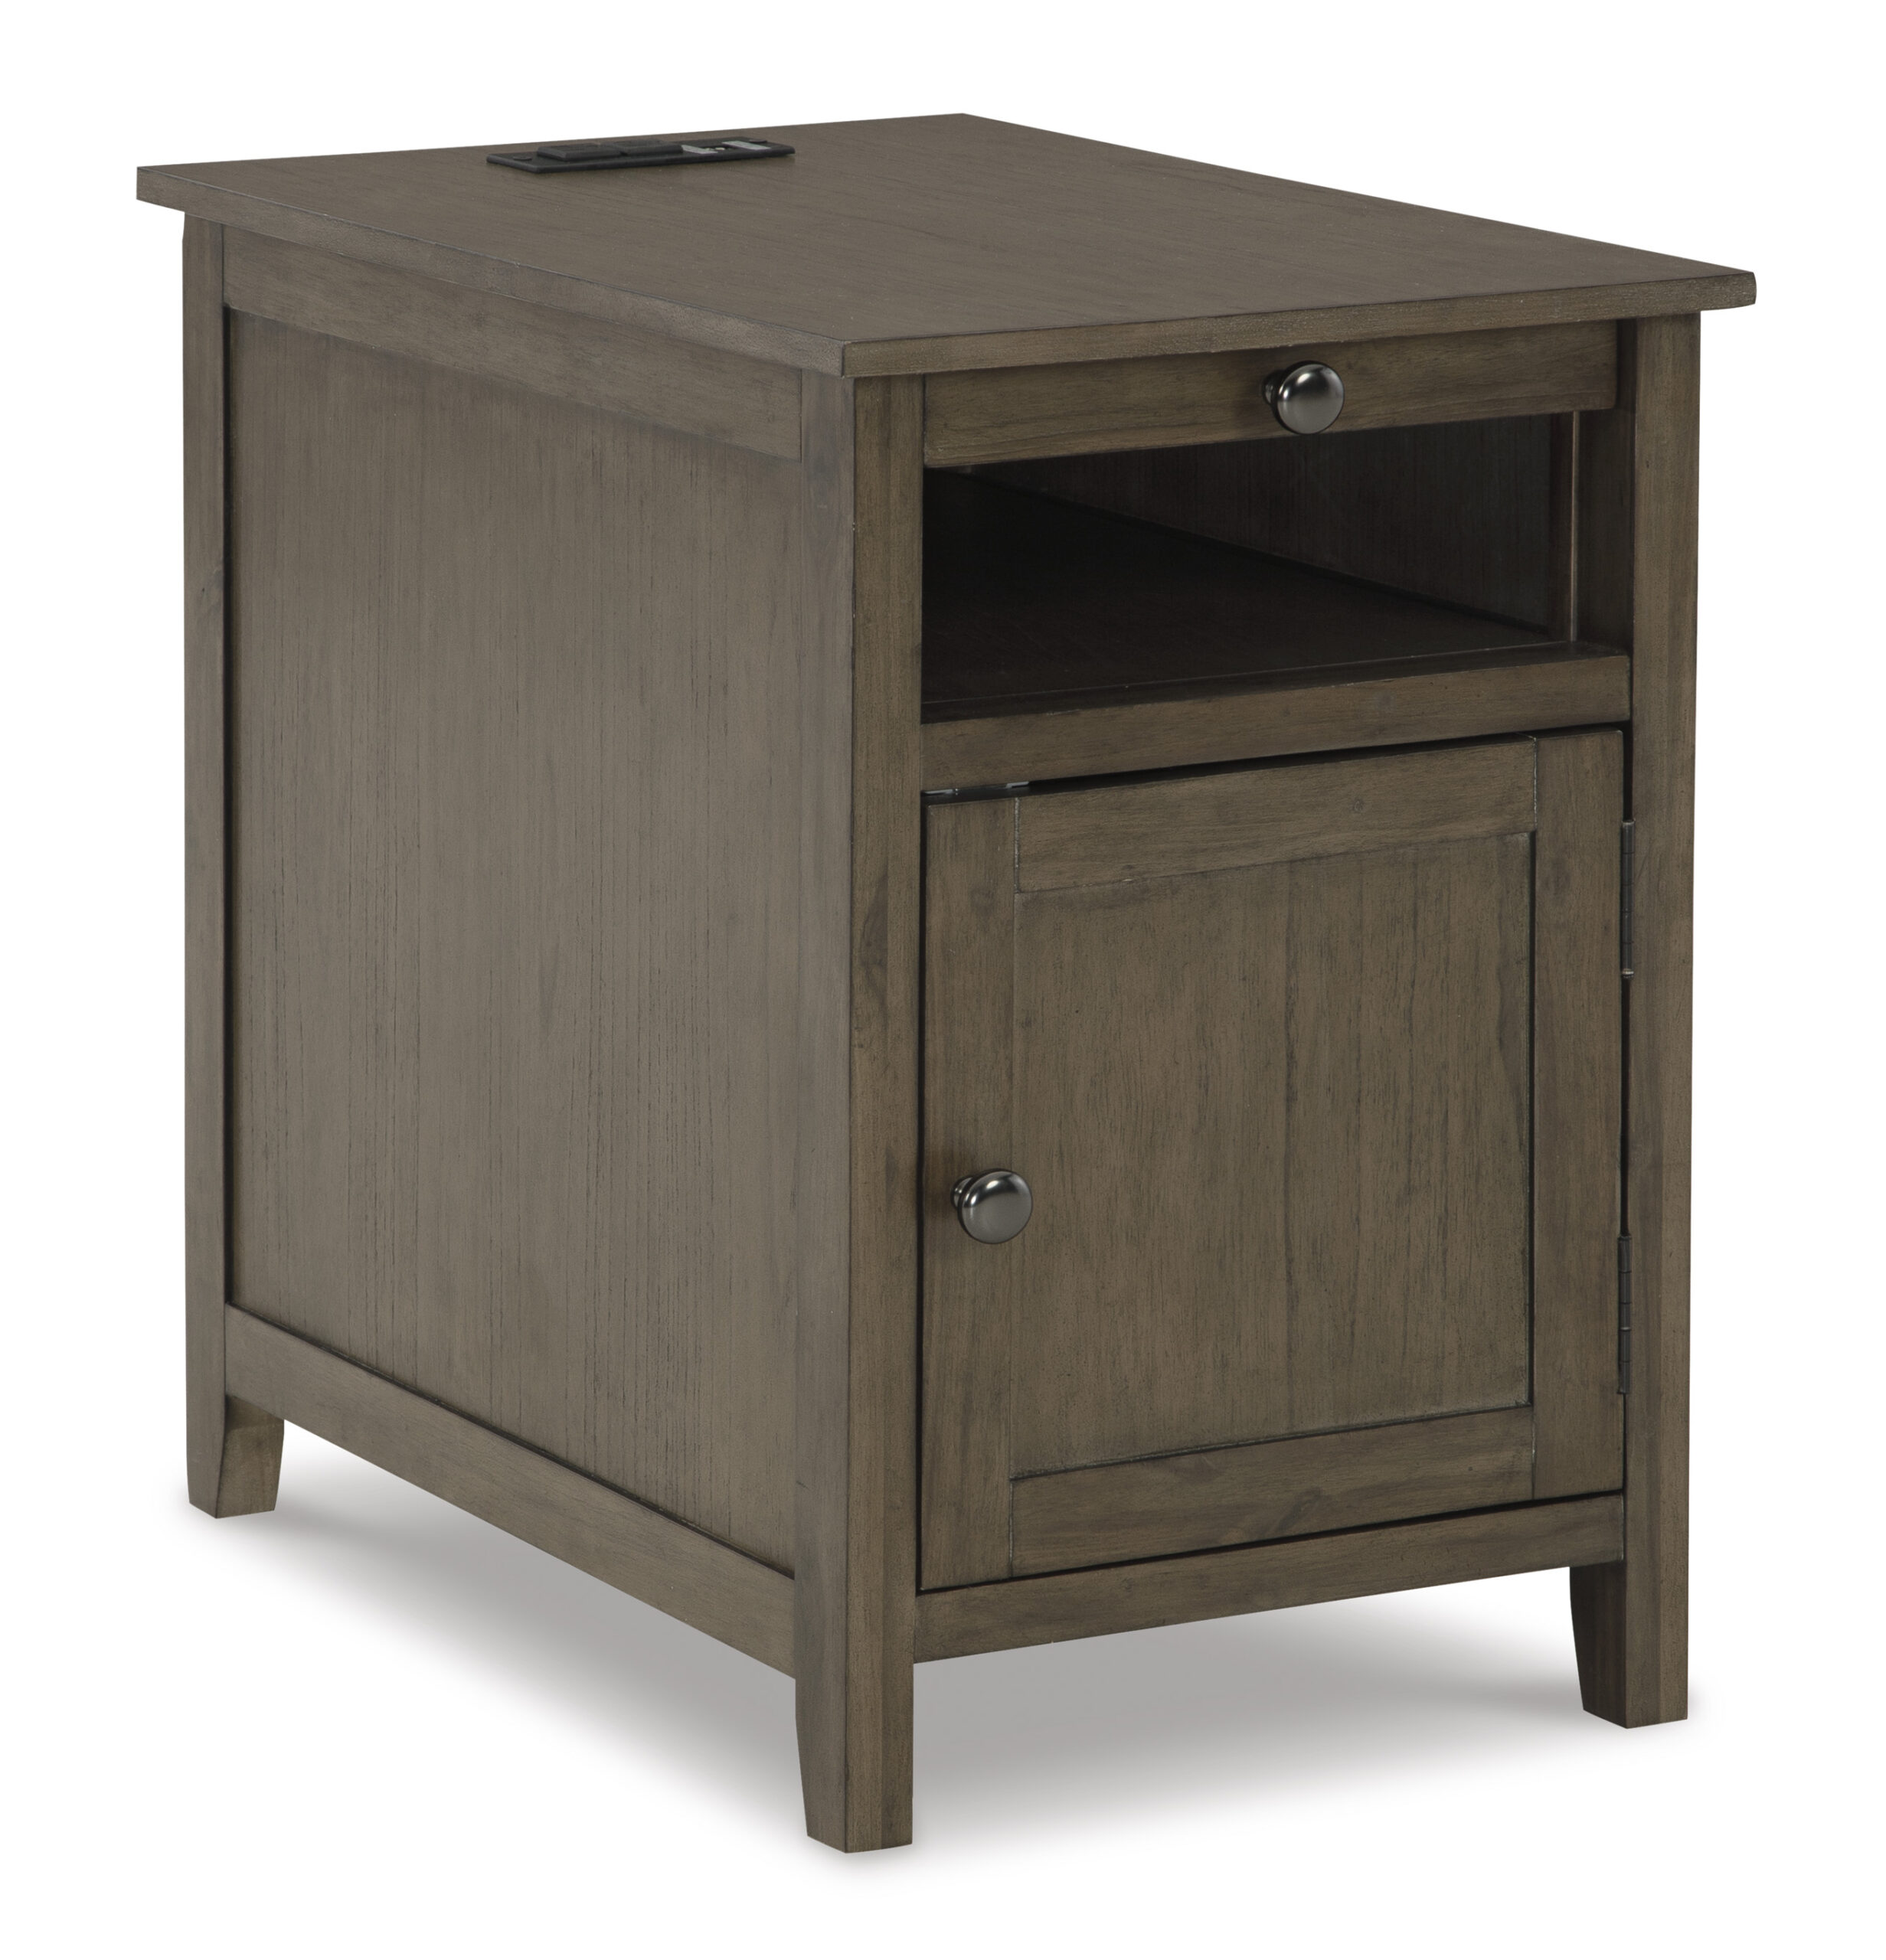 T300-217 Treytown Chairside End Table